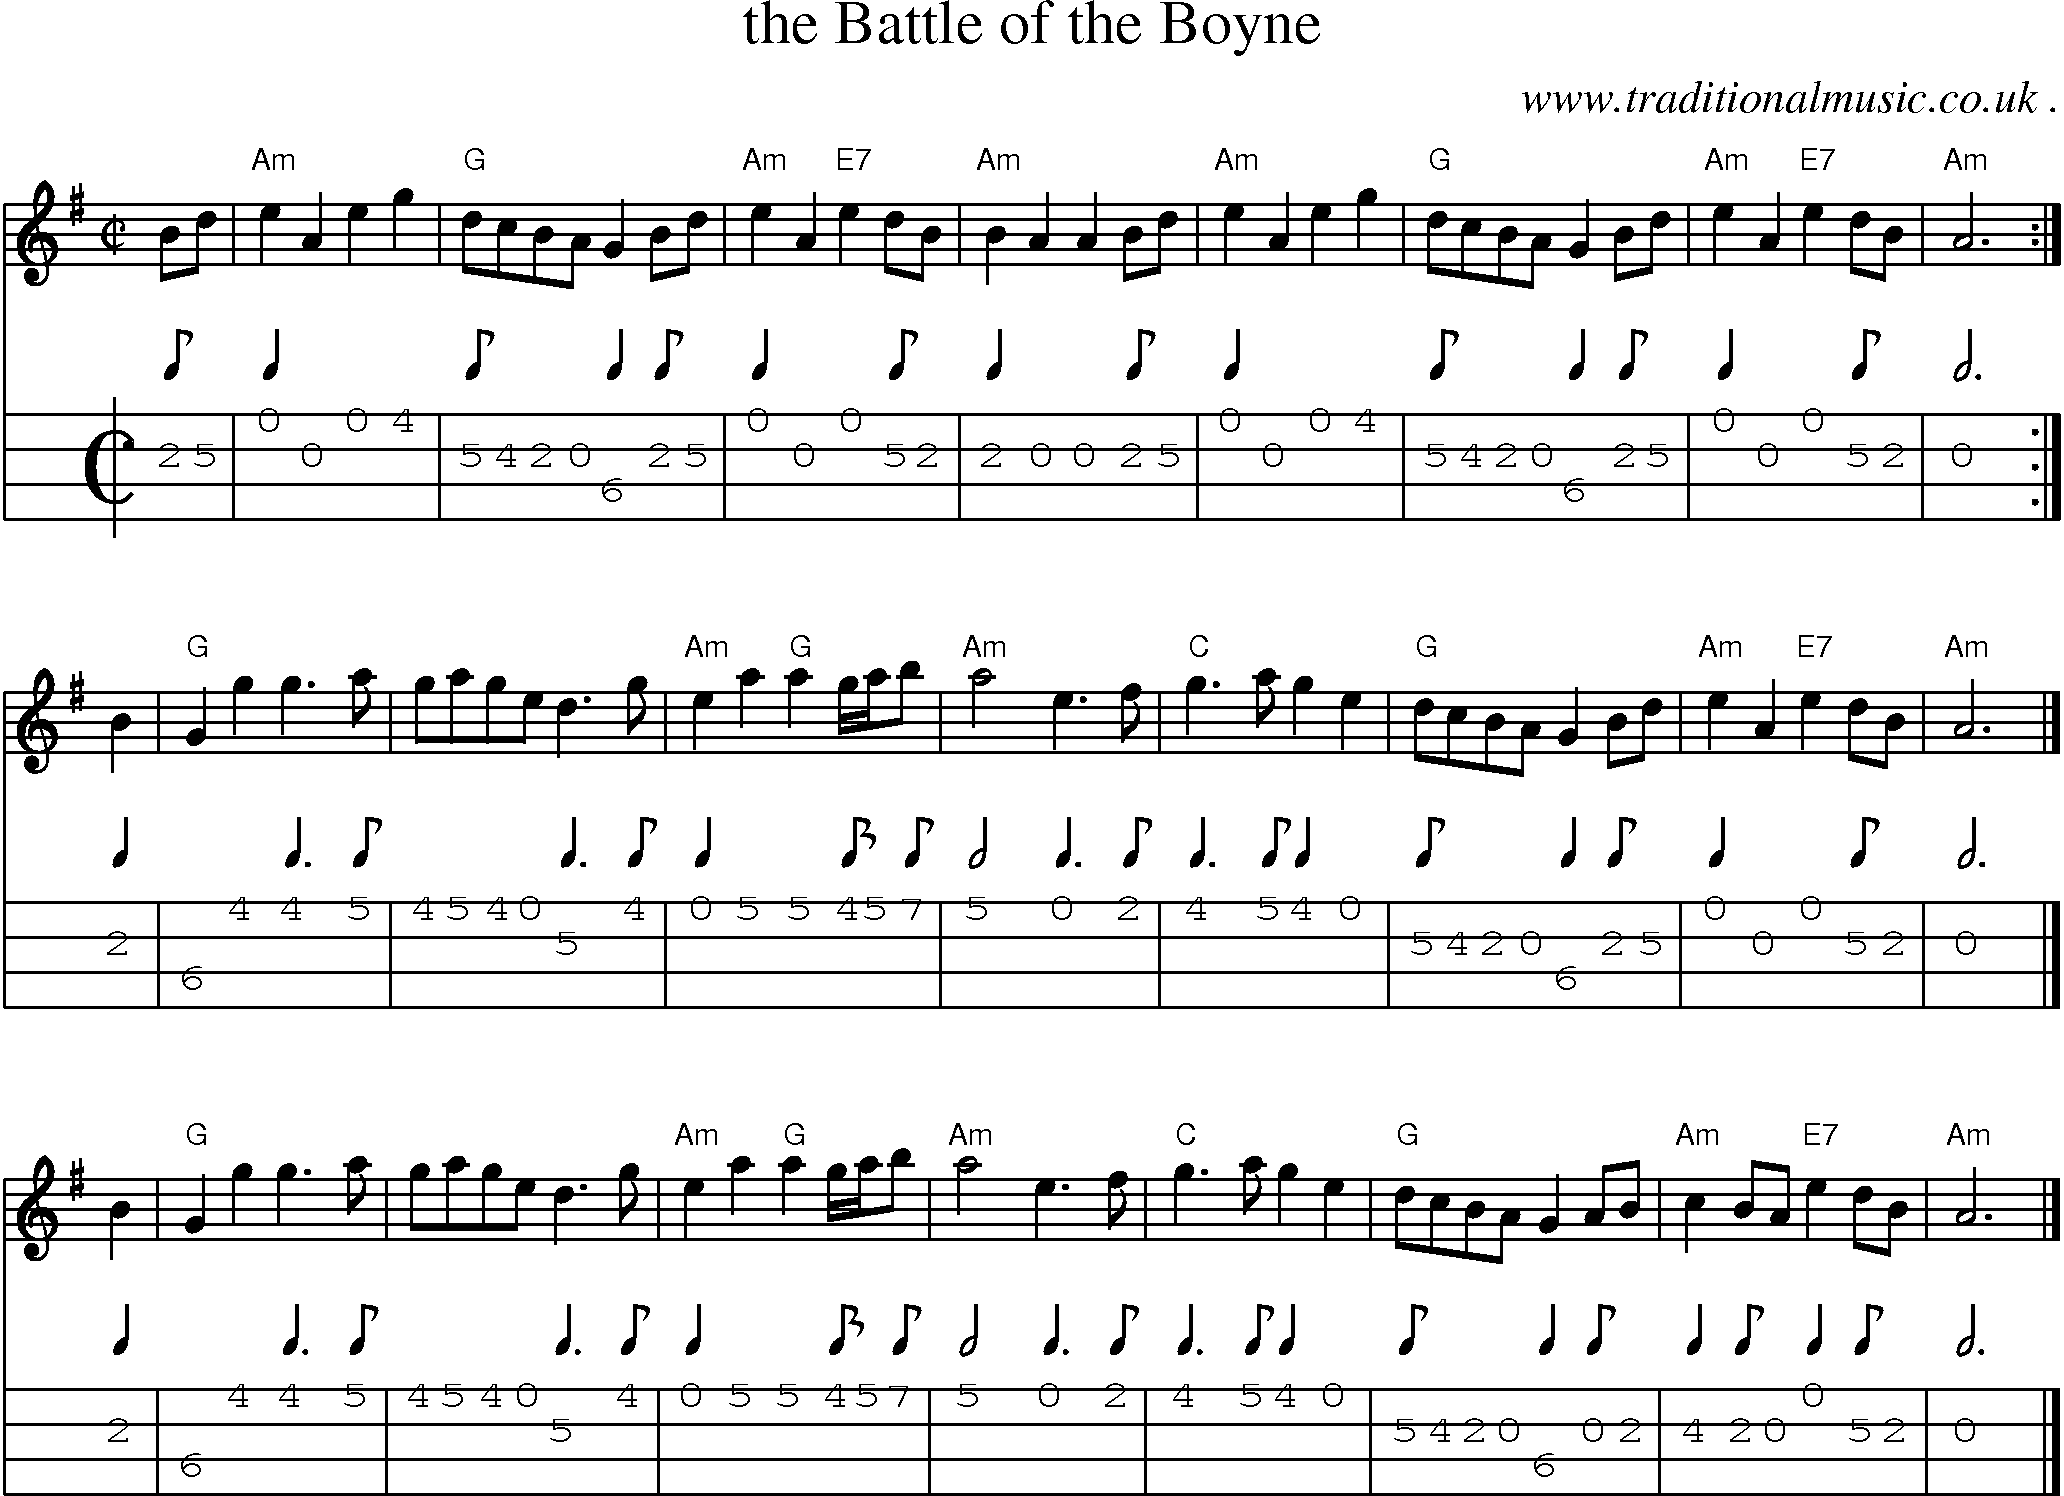 Sheet-music  score, Chords and Mandolin Tabs for The Battle Of The Boyne